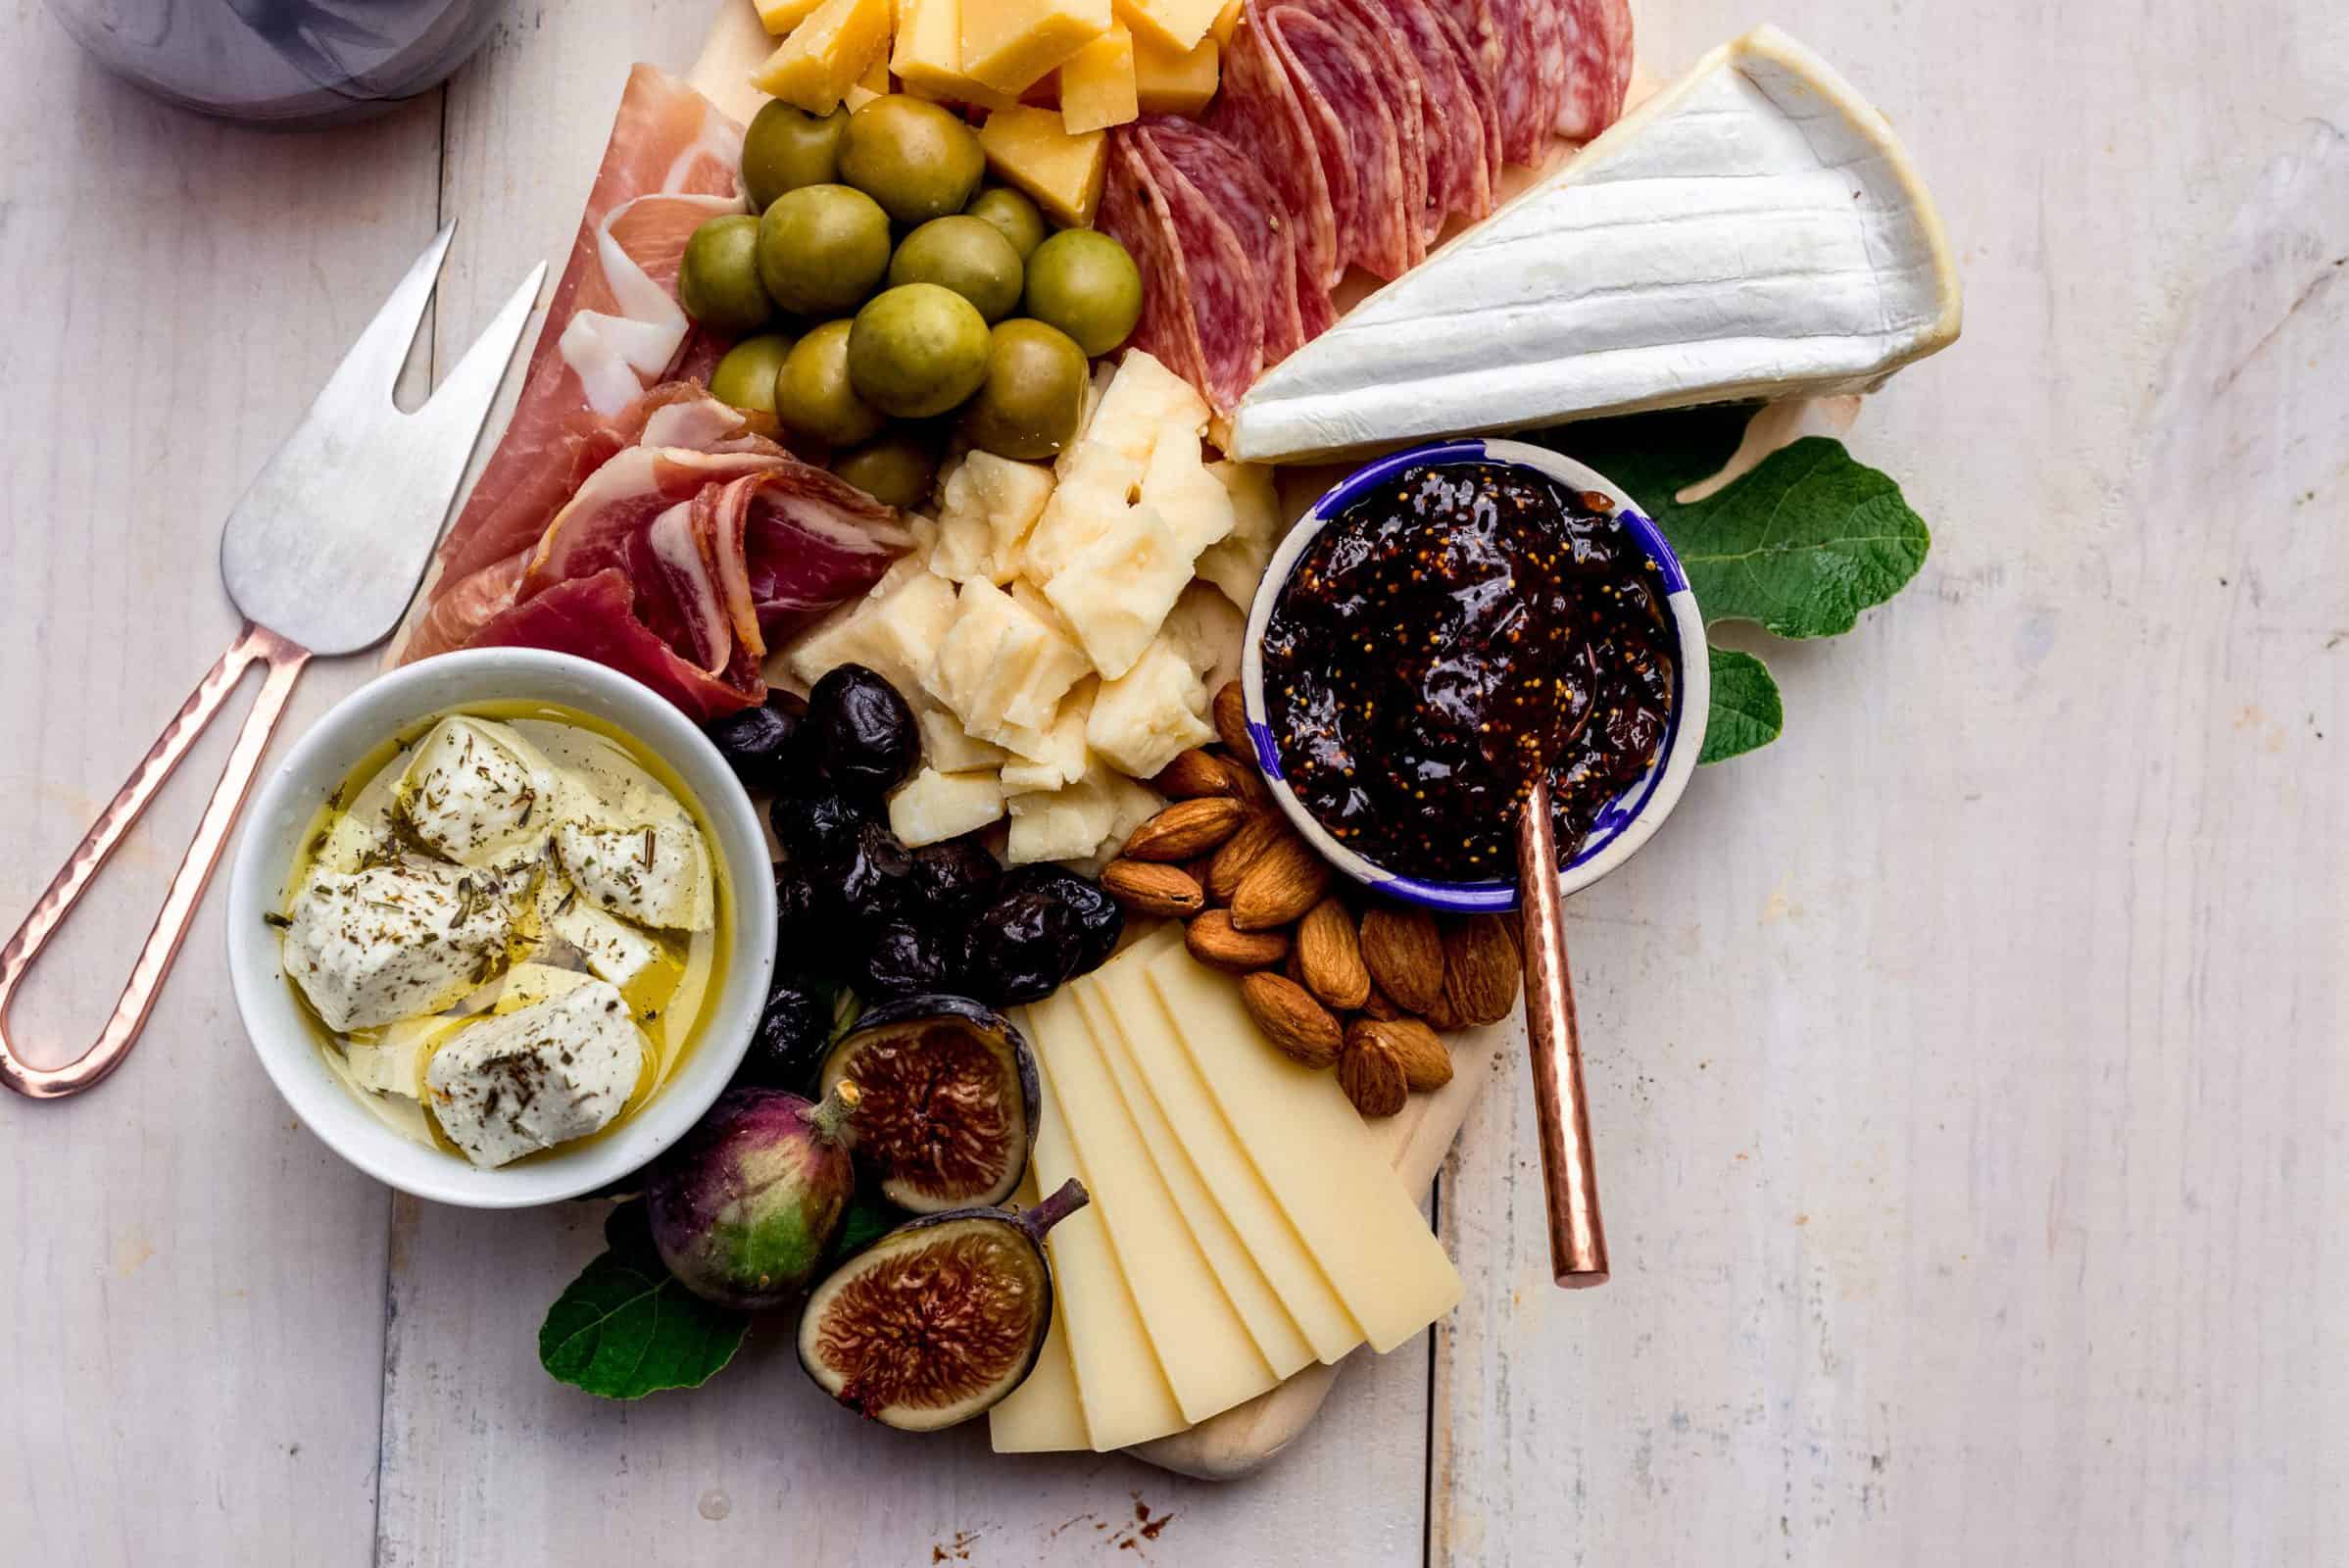 6 Simple Steps to Making the Perfect Charcuterie Board